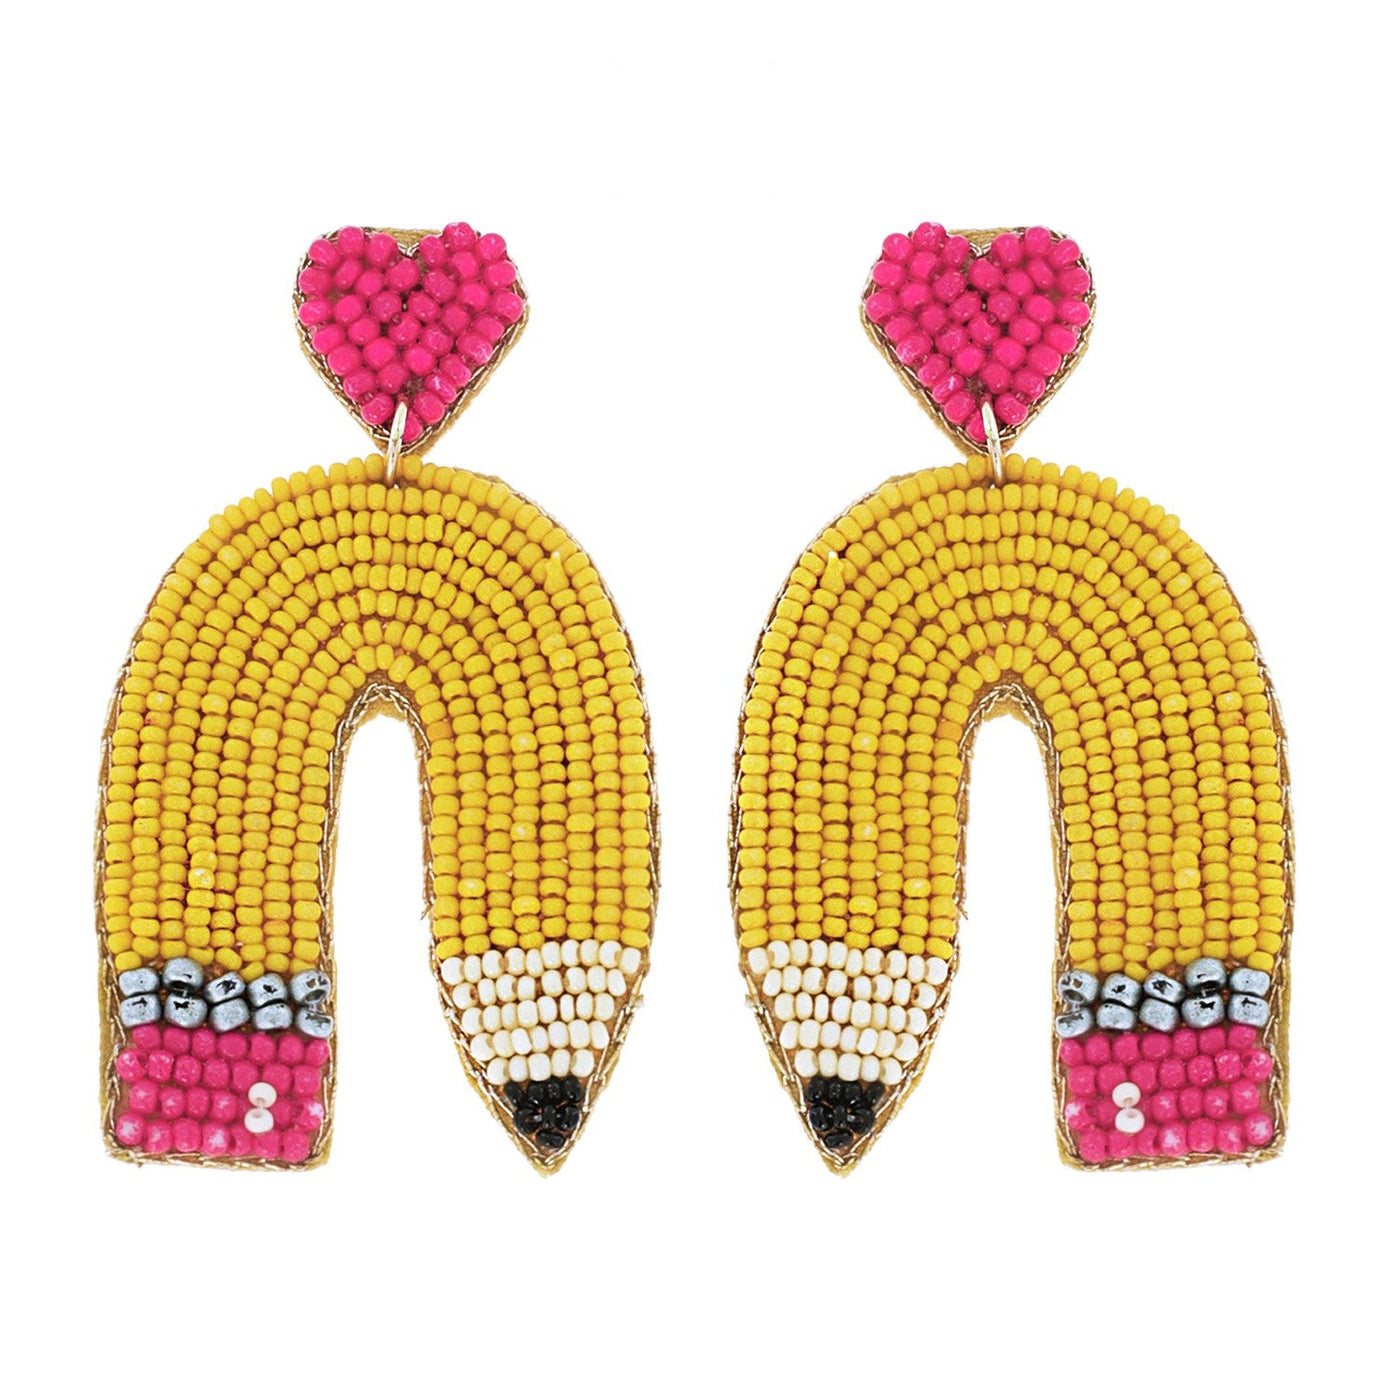 Curved Pencil Seed Bead Embroidery Teacher Earrings